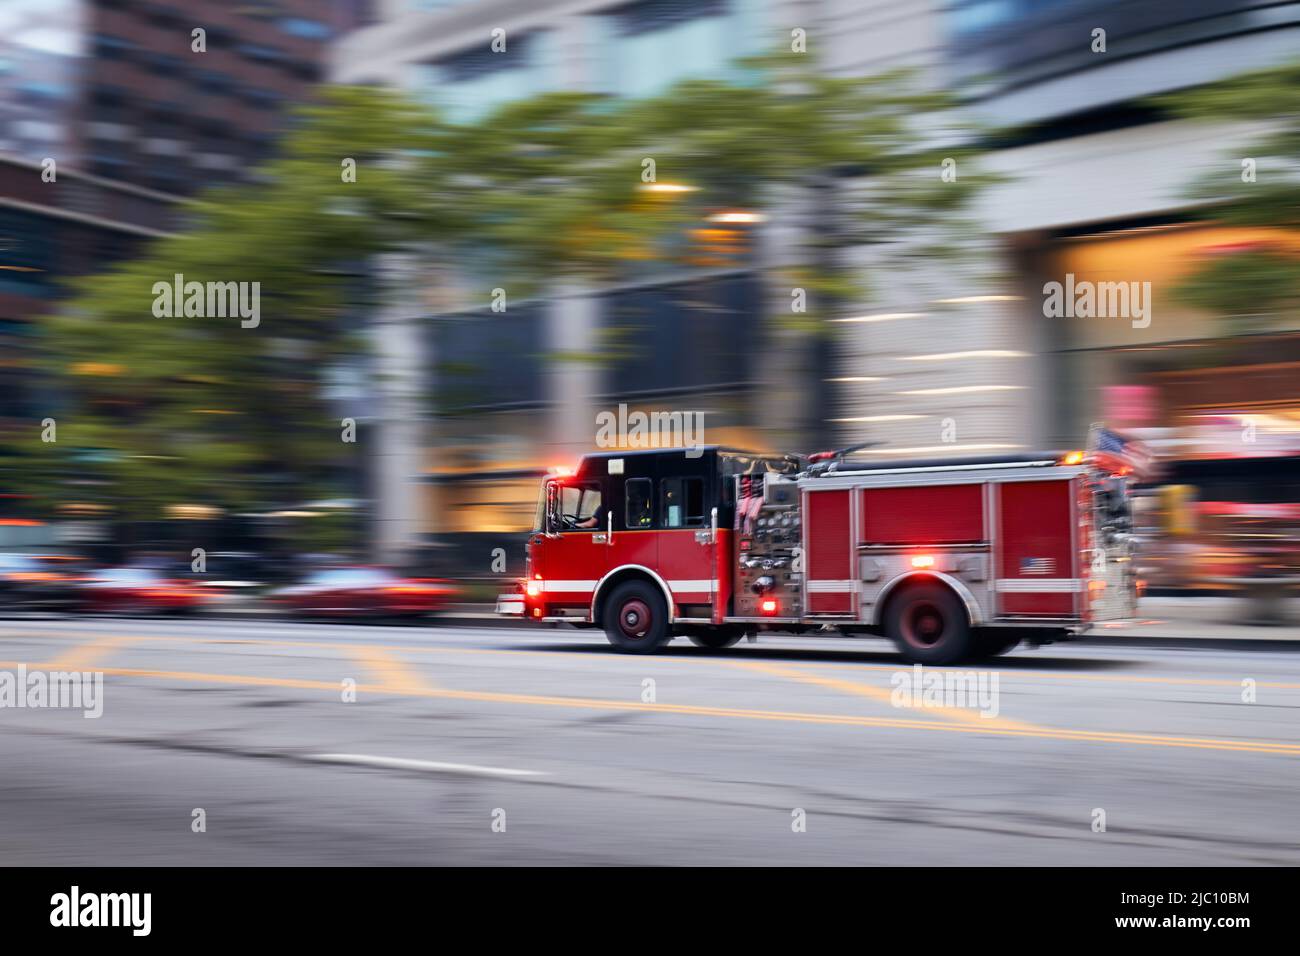 Fast moving fire engine on city street. Firefighters in blurred motion. Themes rescue, urgency and help. Stock Photo